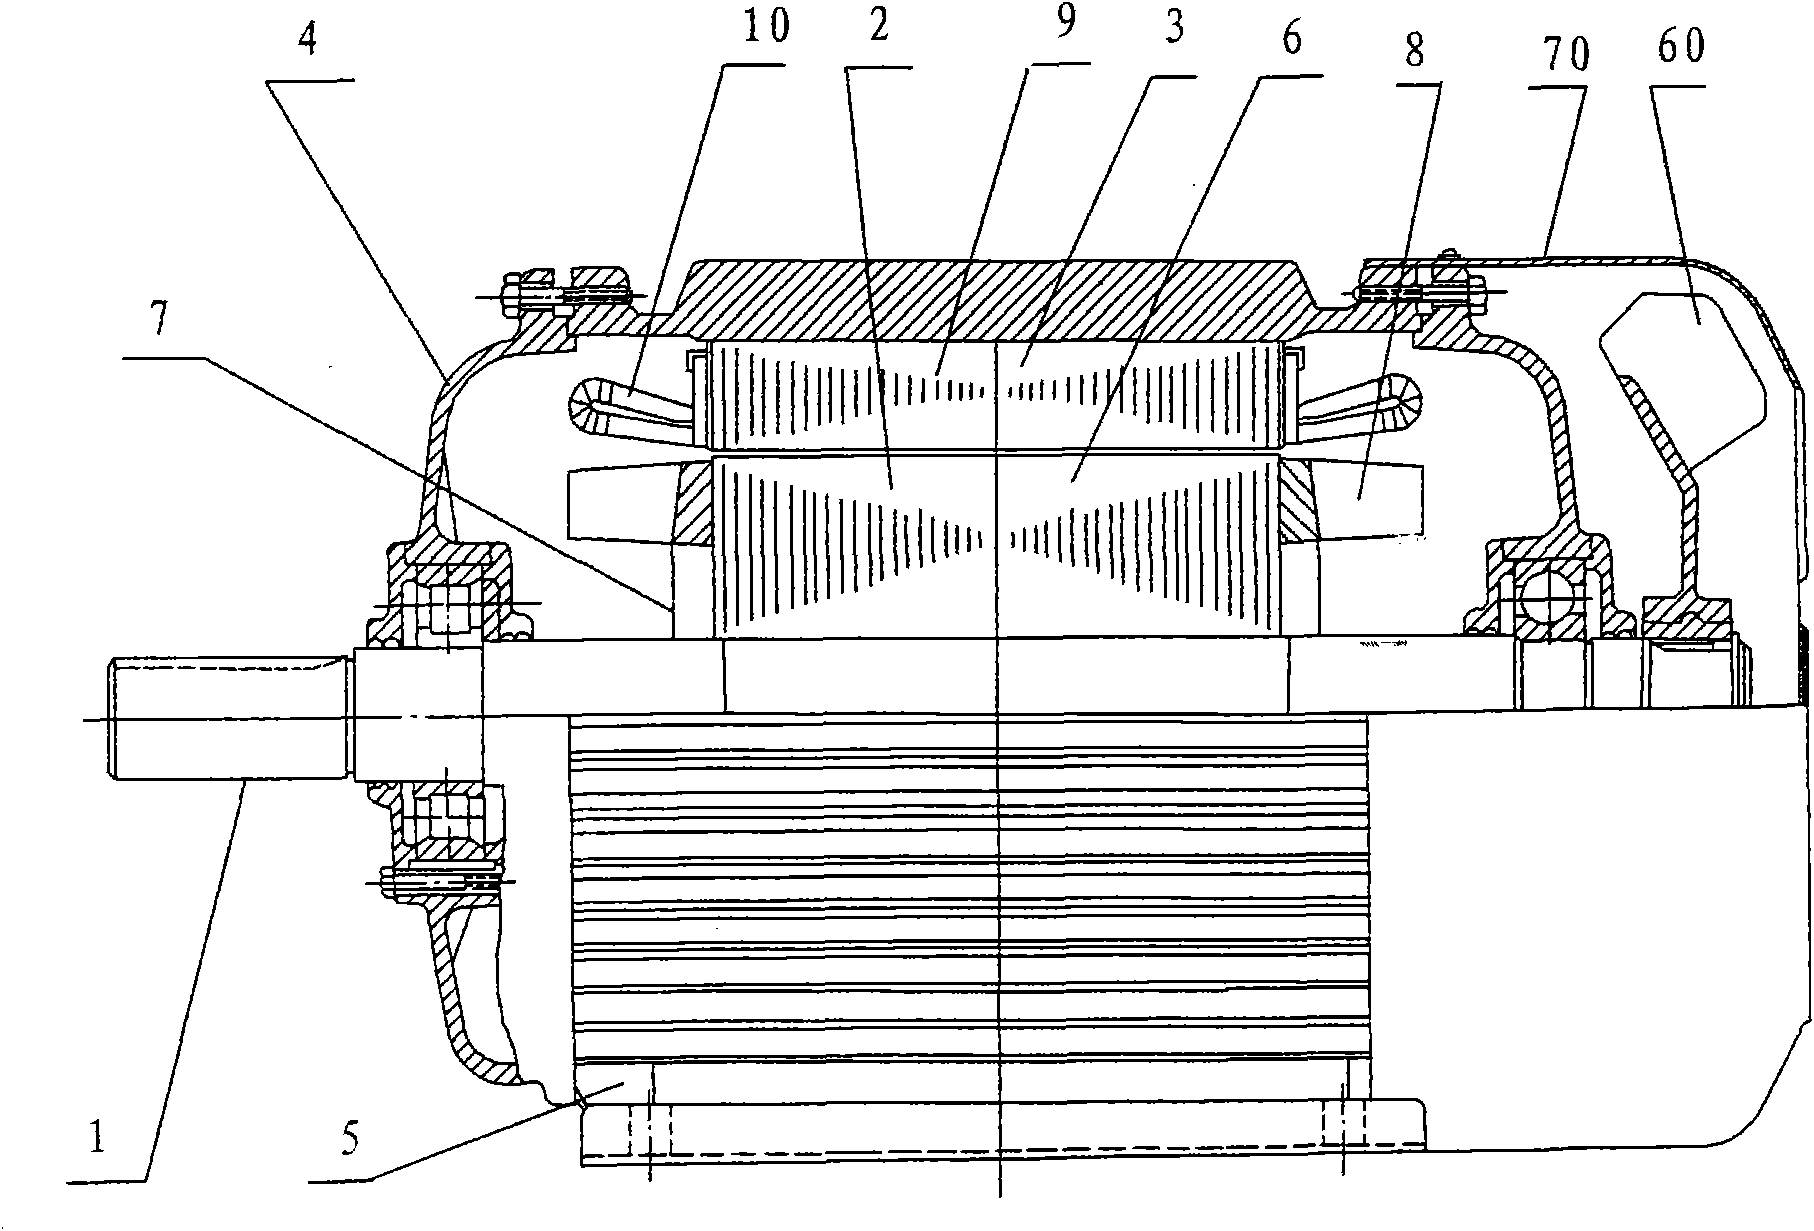 Small-power motor with internal air-cooling system